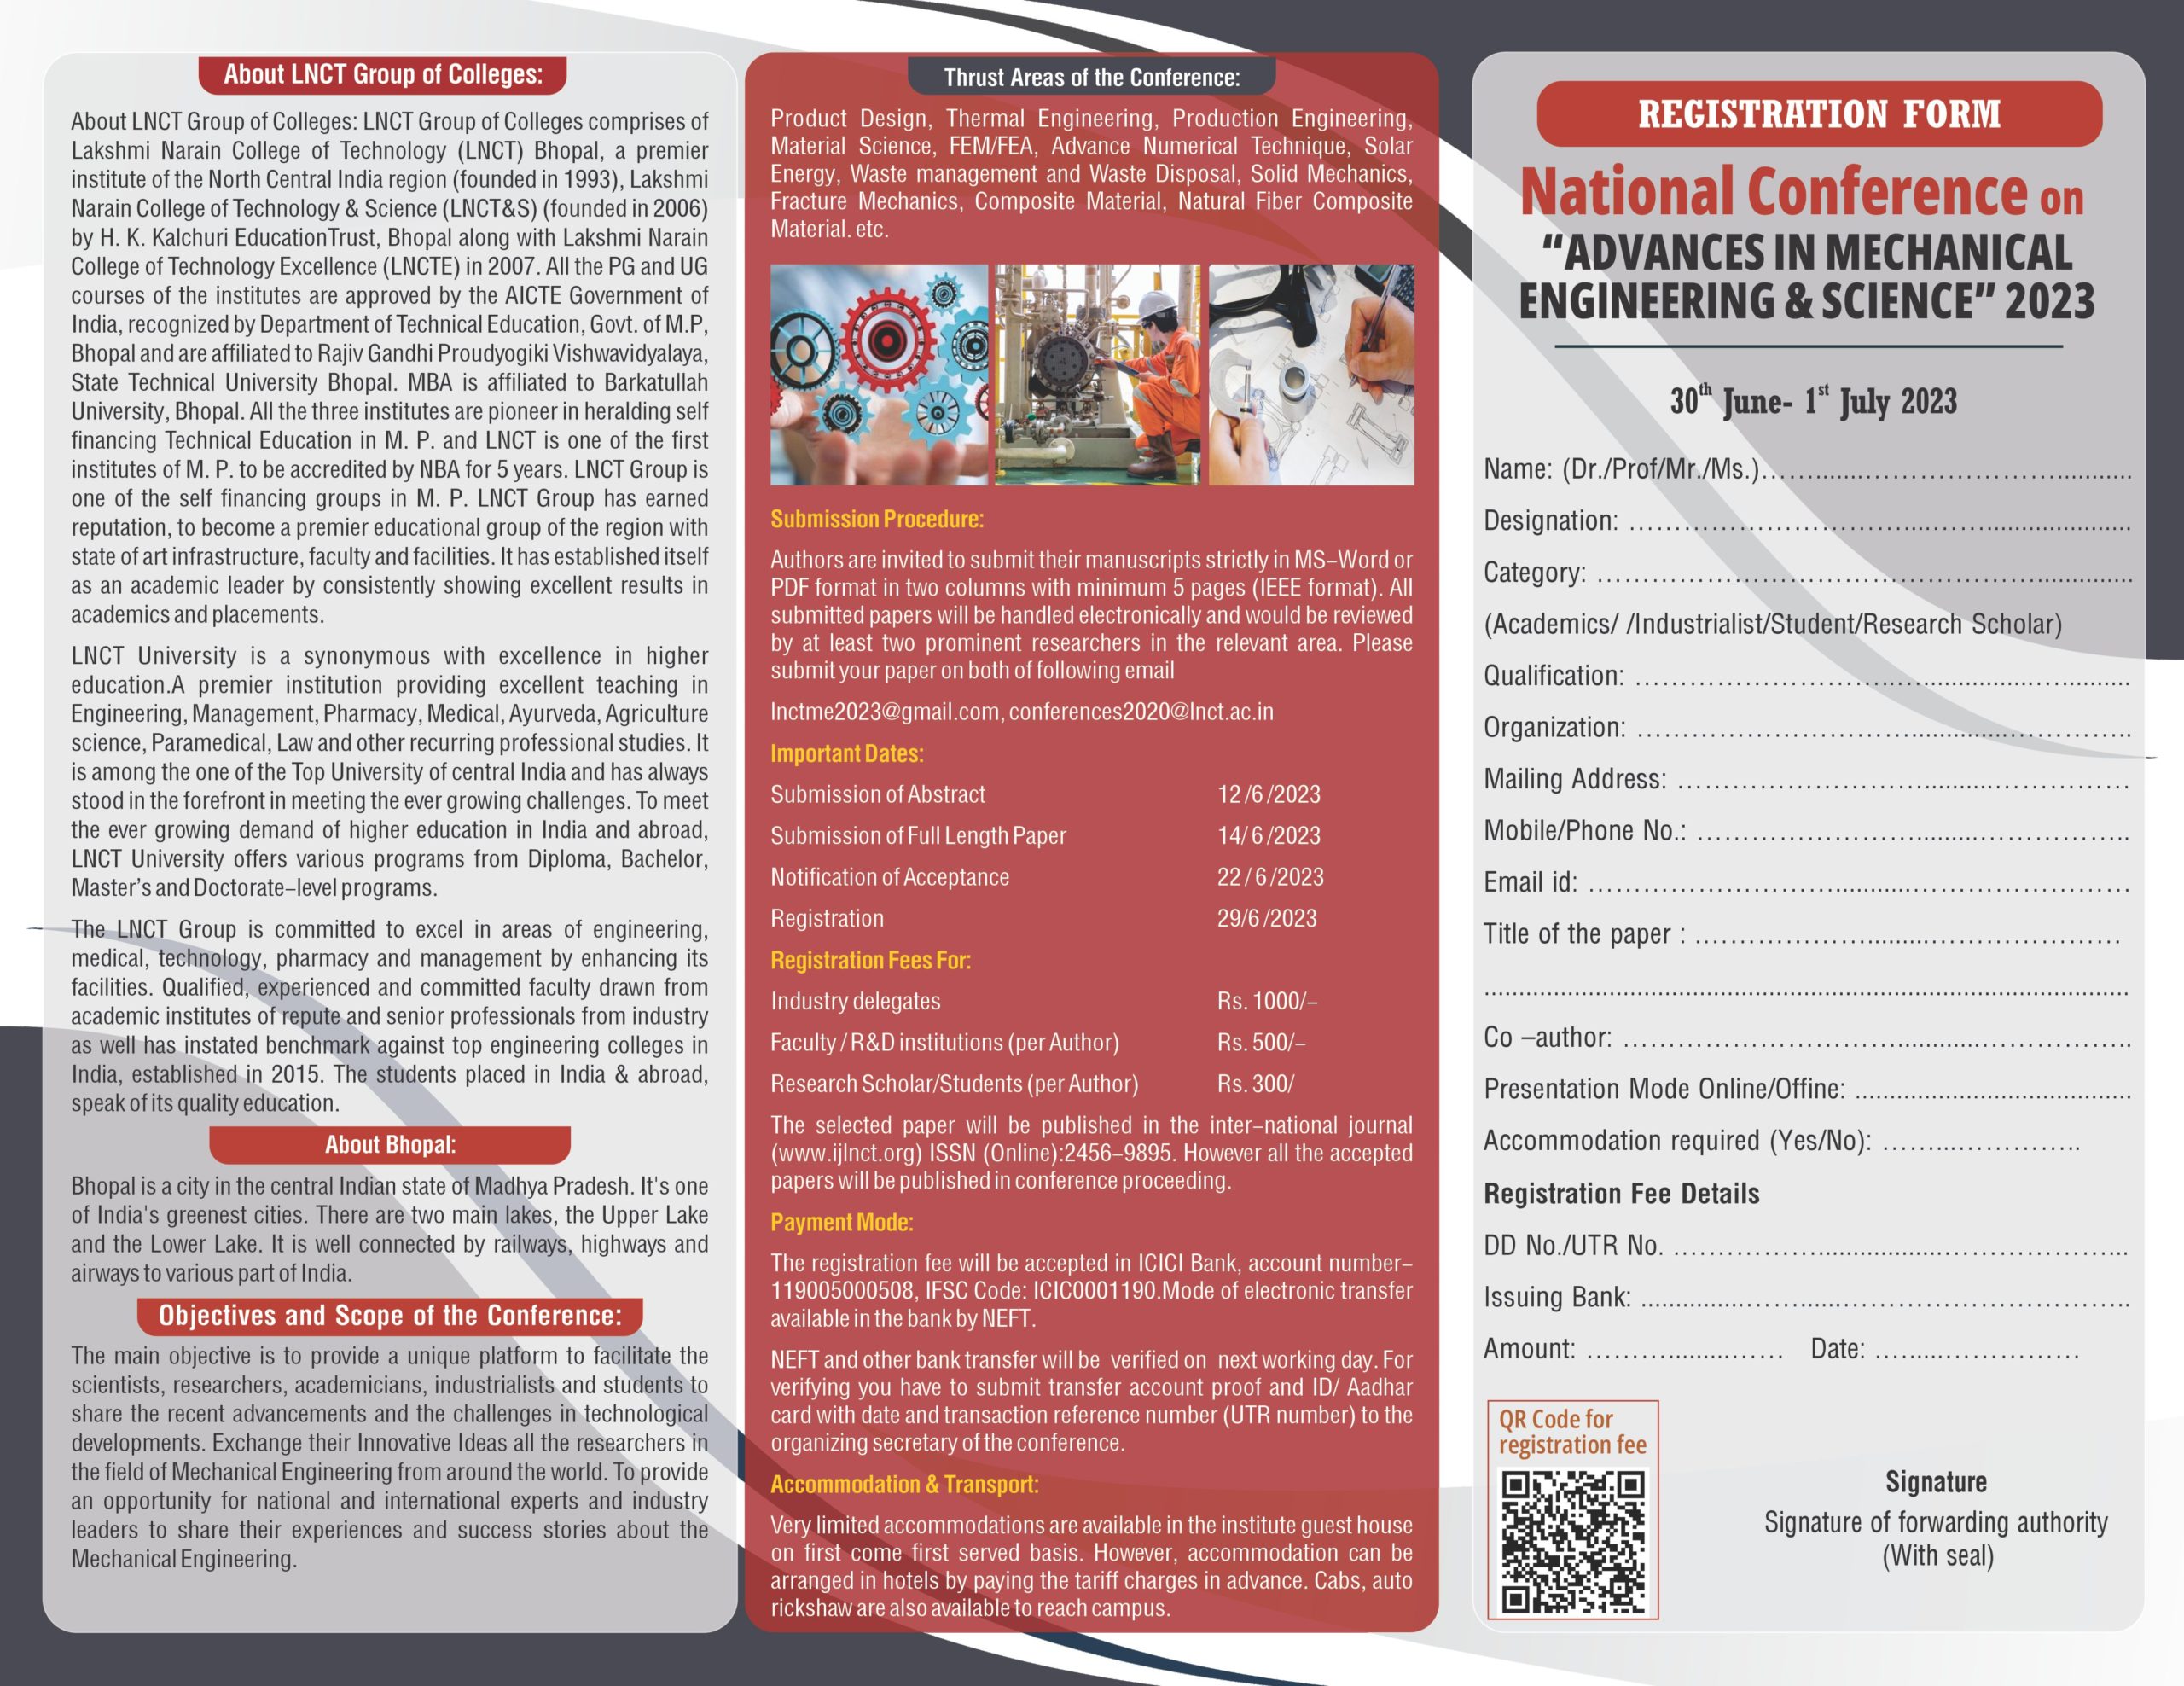 National Conference on Advances in Mechanical Engineering & Science 1